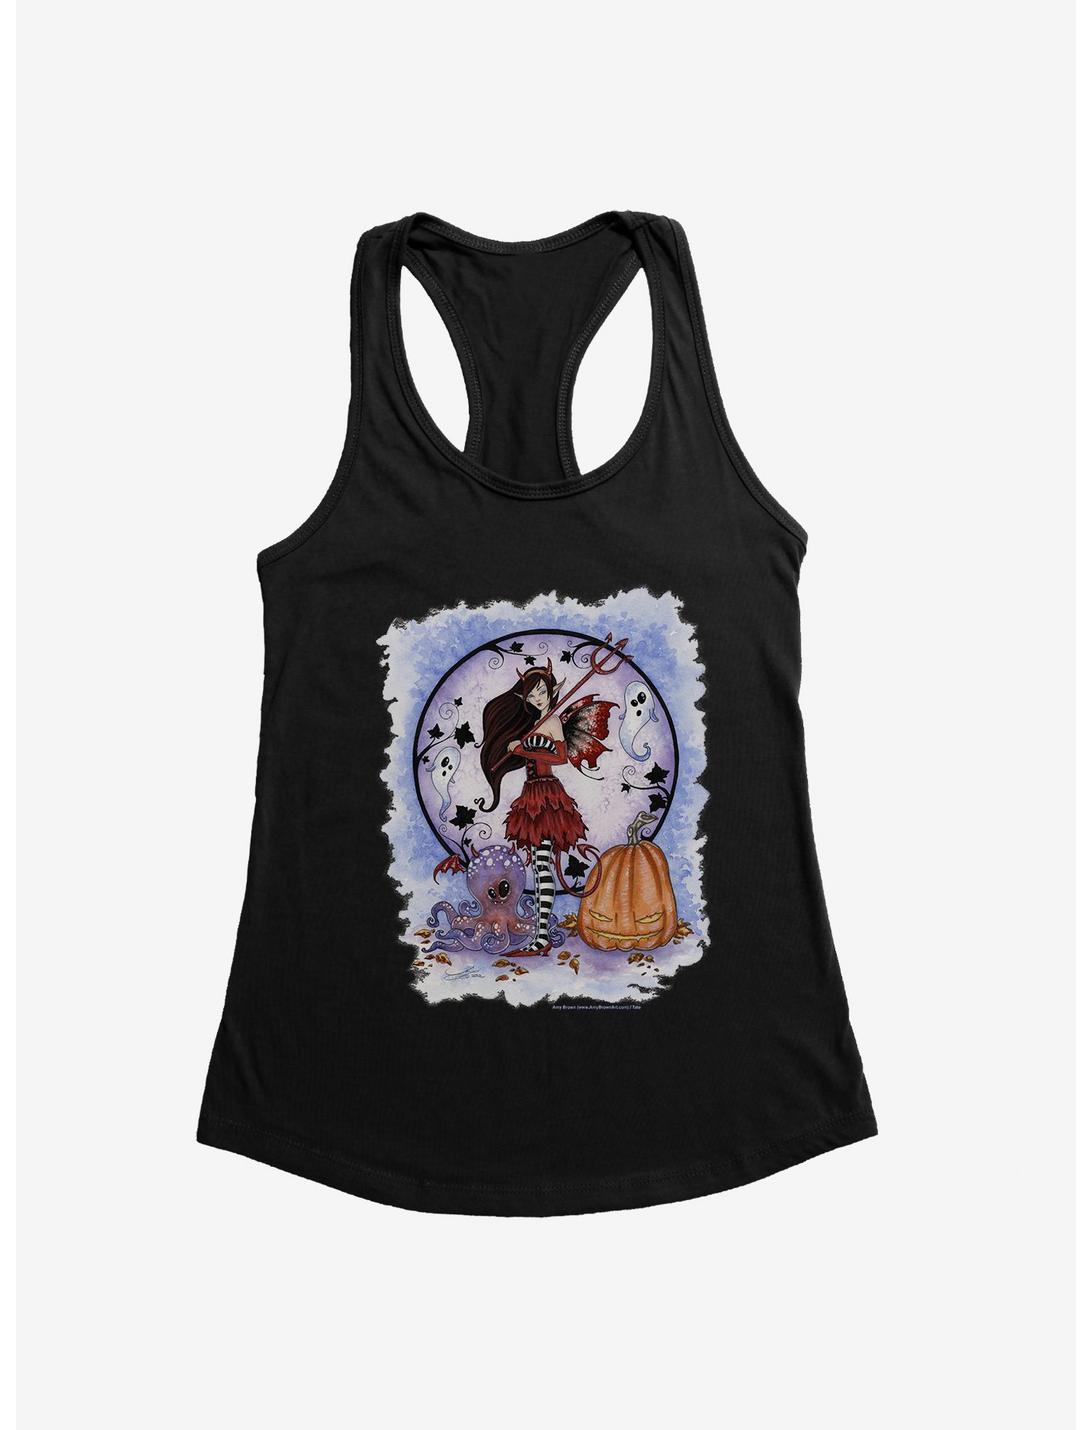 Mischief Makers Womens Tank Top by Amy Brown, , hi-res